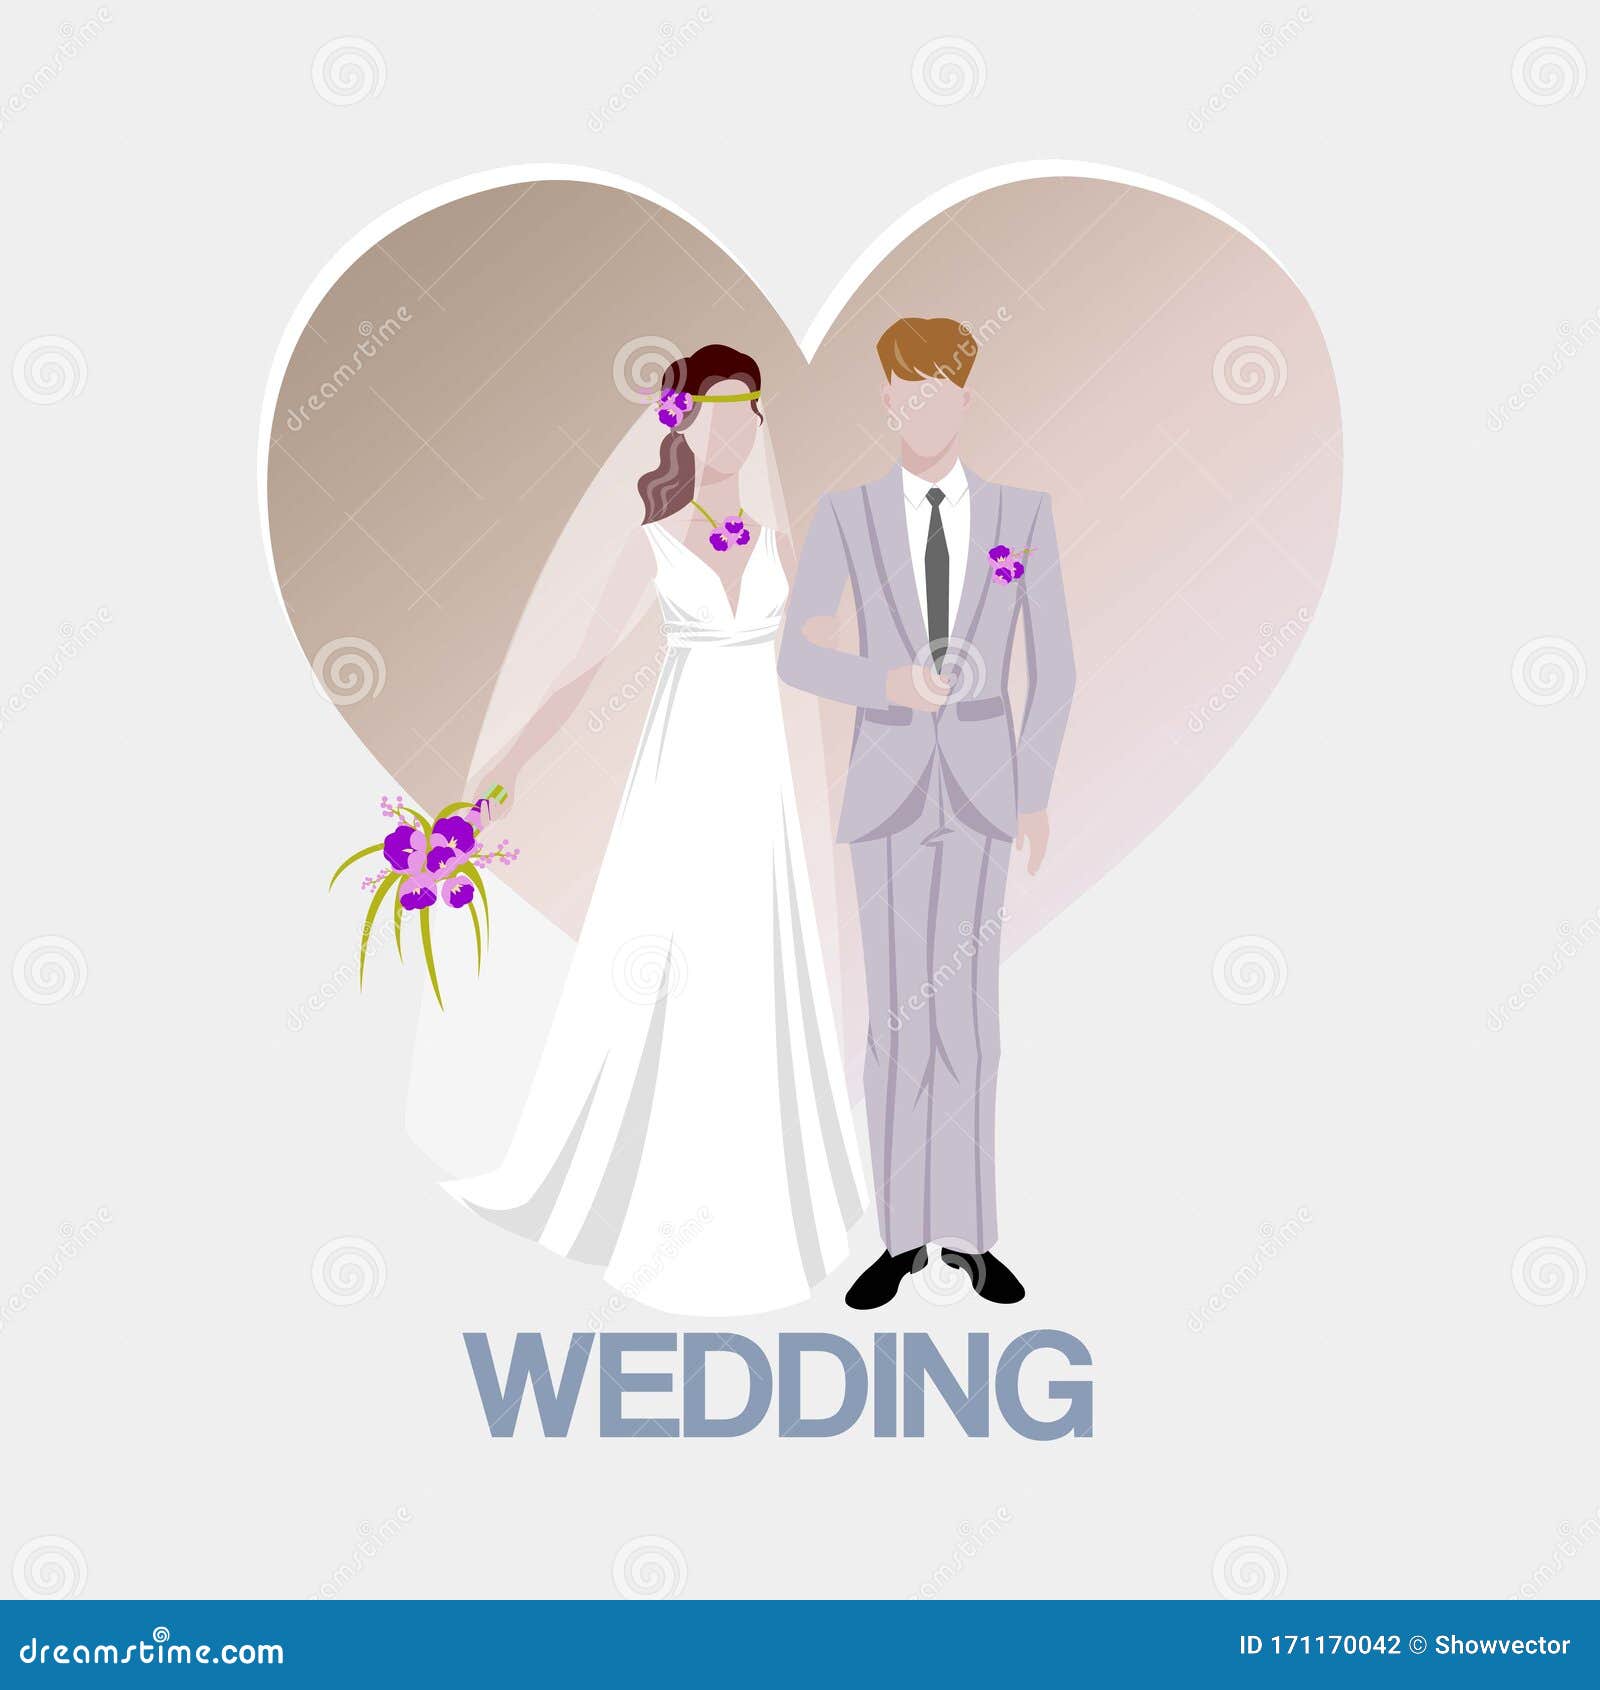 LOVELY COLOURFUL HEARTS & BELLS SPECIAL BRIDE & GROOM WEDDING GREETING CARD 